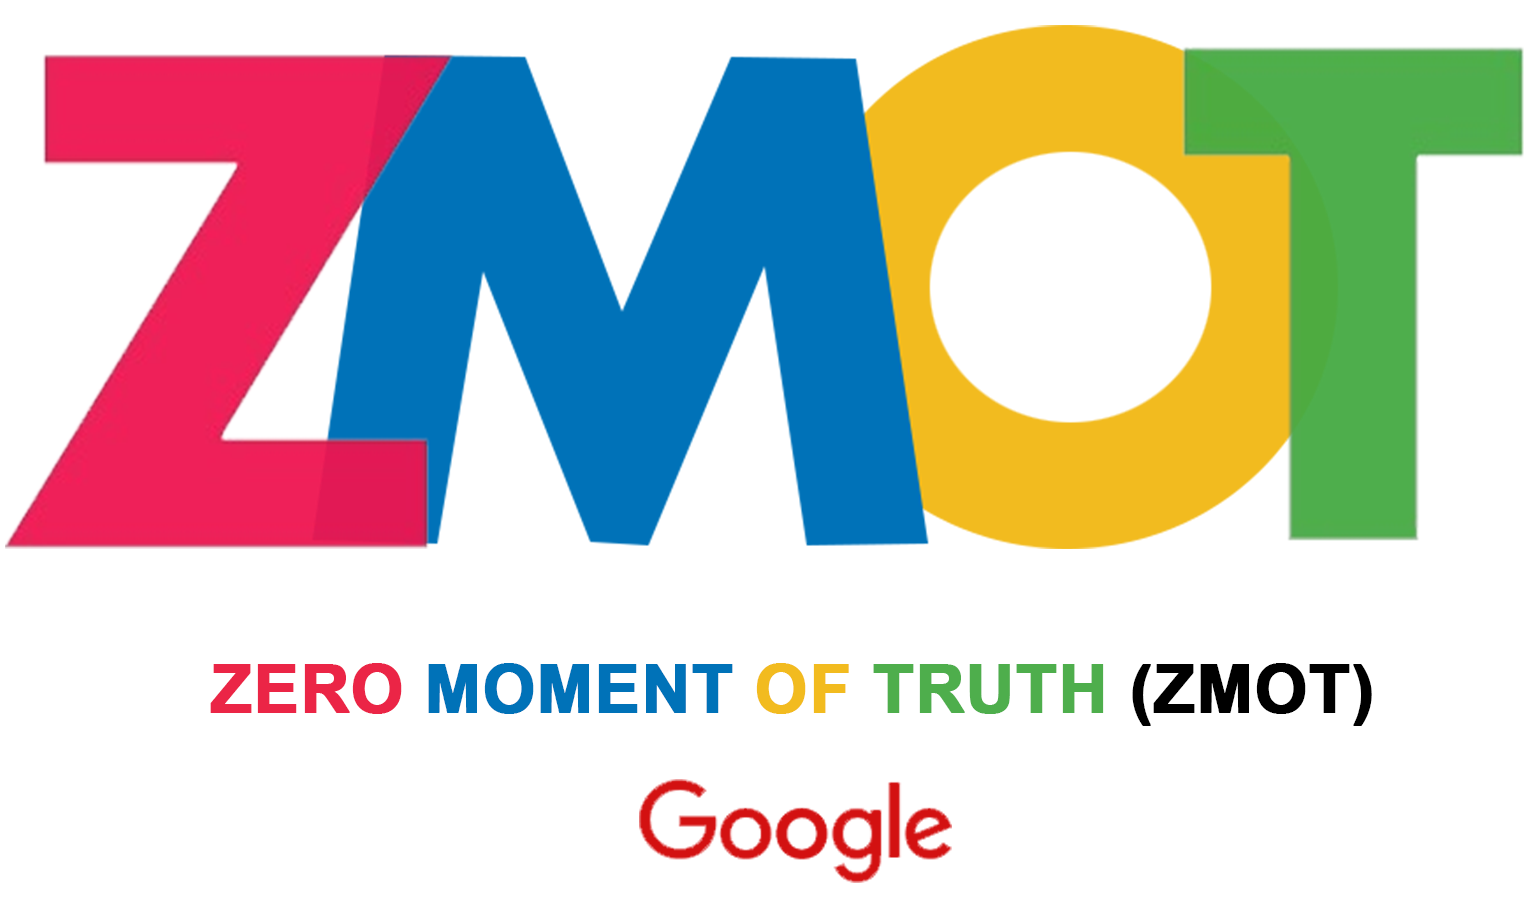 25 Google ZMOT Quotes — The Zero Moment of Truth